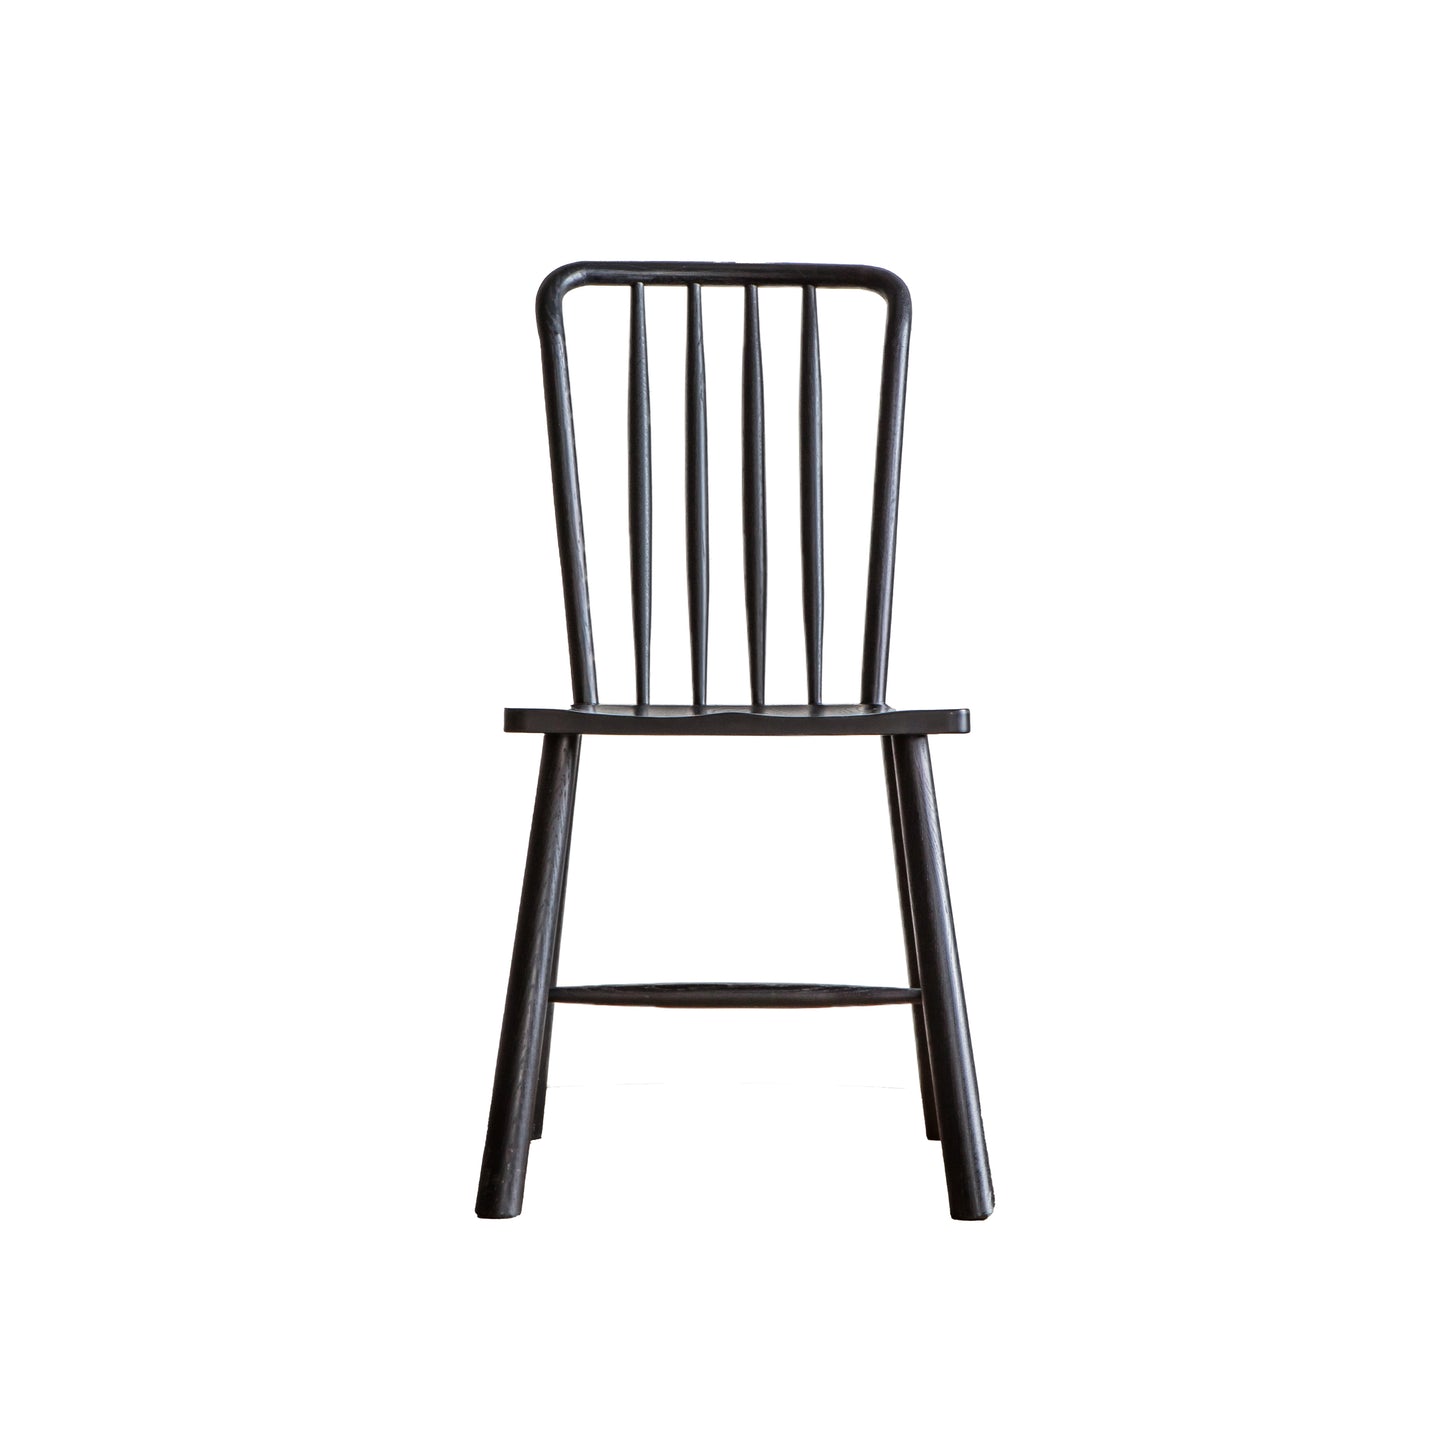 A black Tigley Dining Chair set by Kikiathome.co.uk showcased on a white background, perfect for interior decor and home furniture.